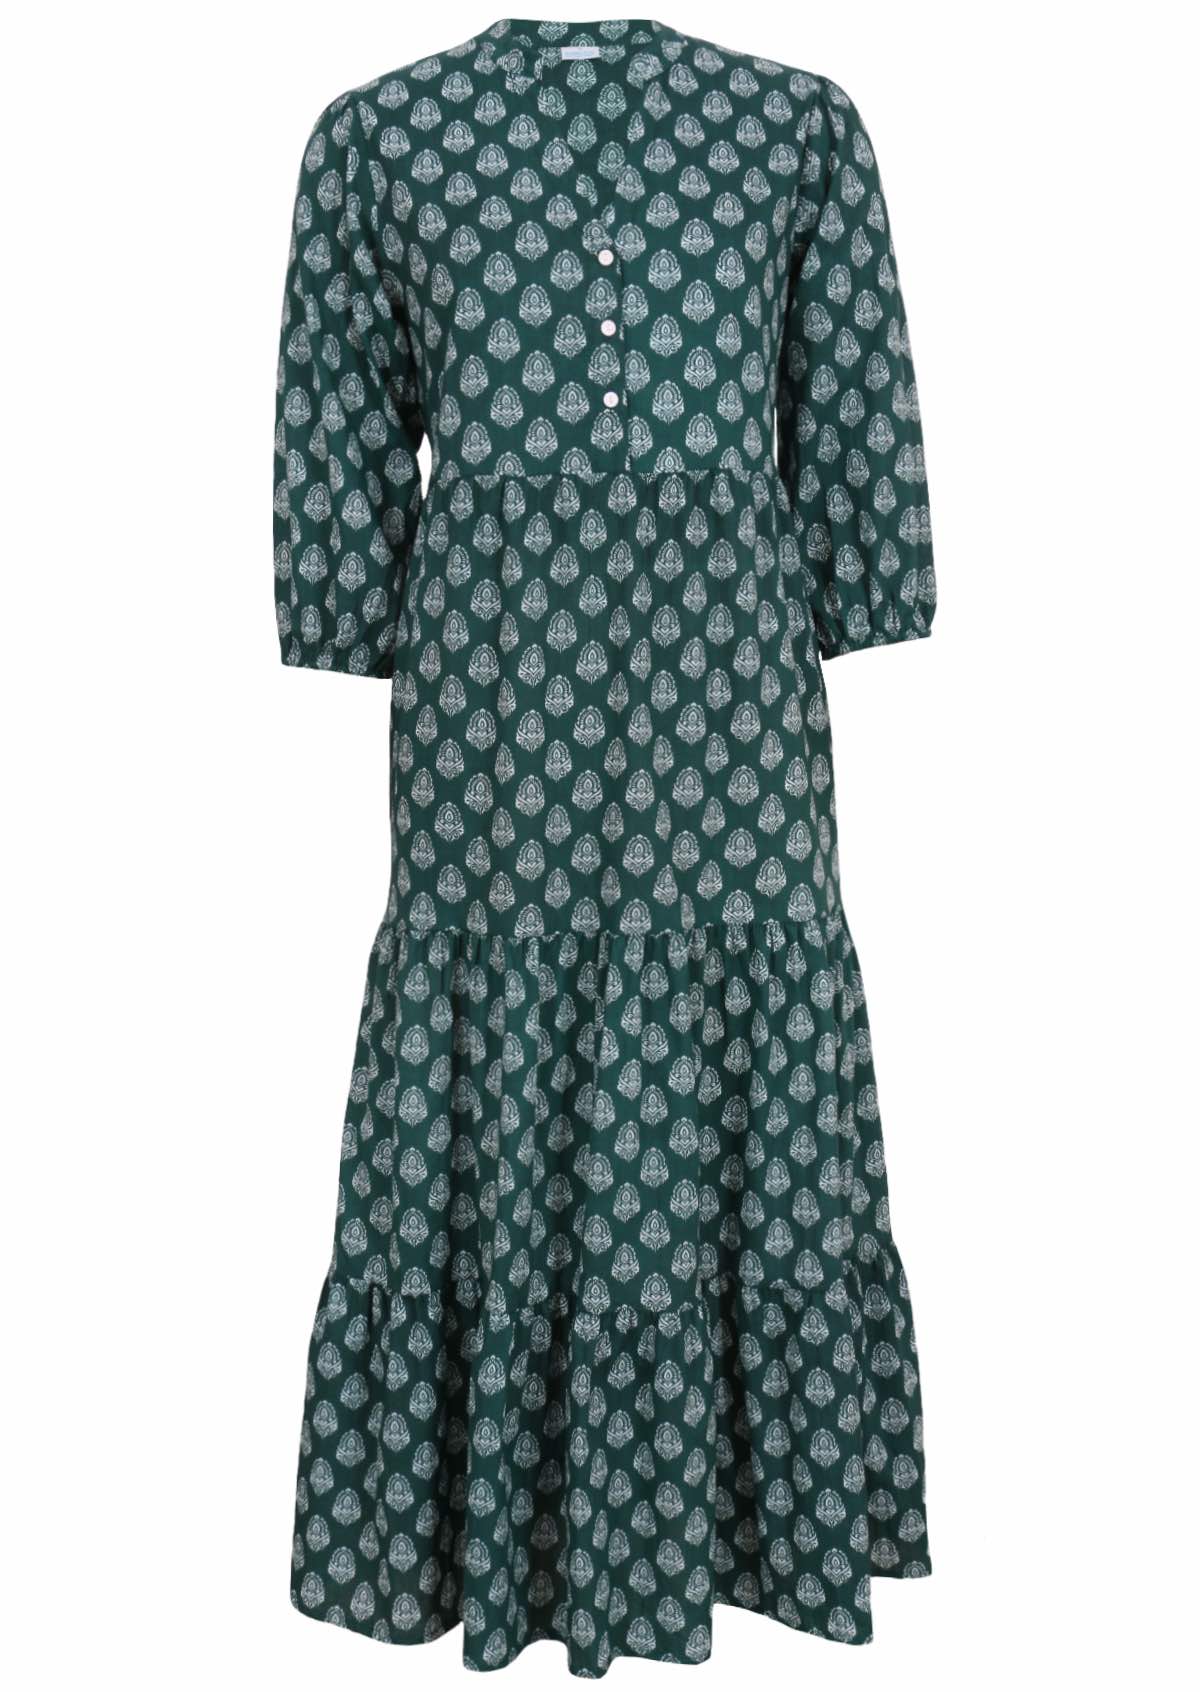 White pendant print on a green base cotton maxi dress with 3/4 sleeves